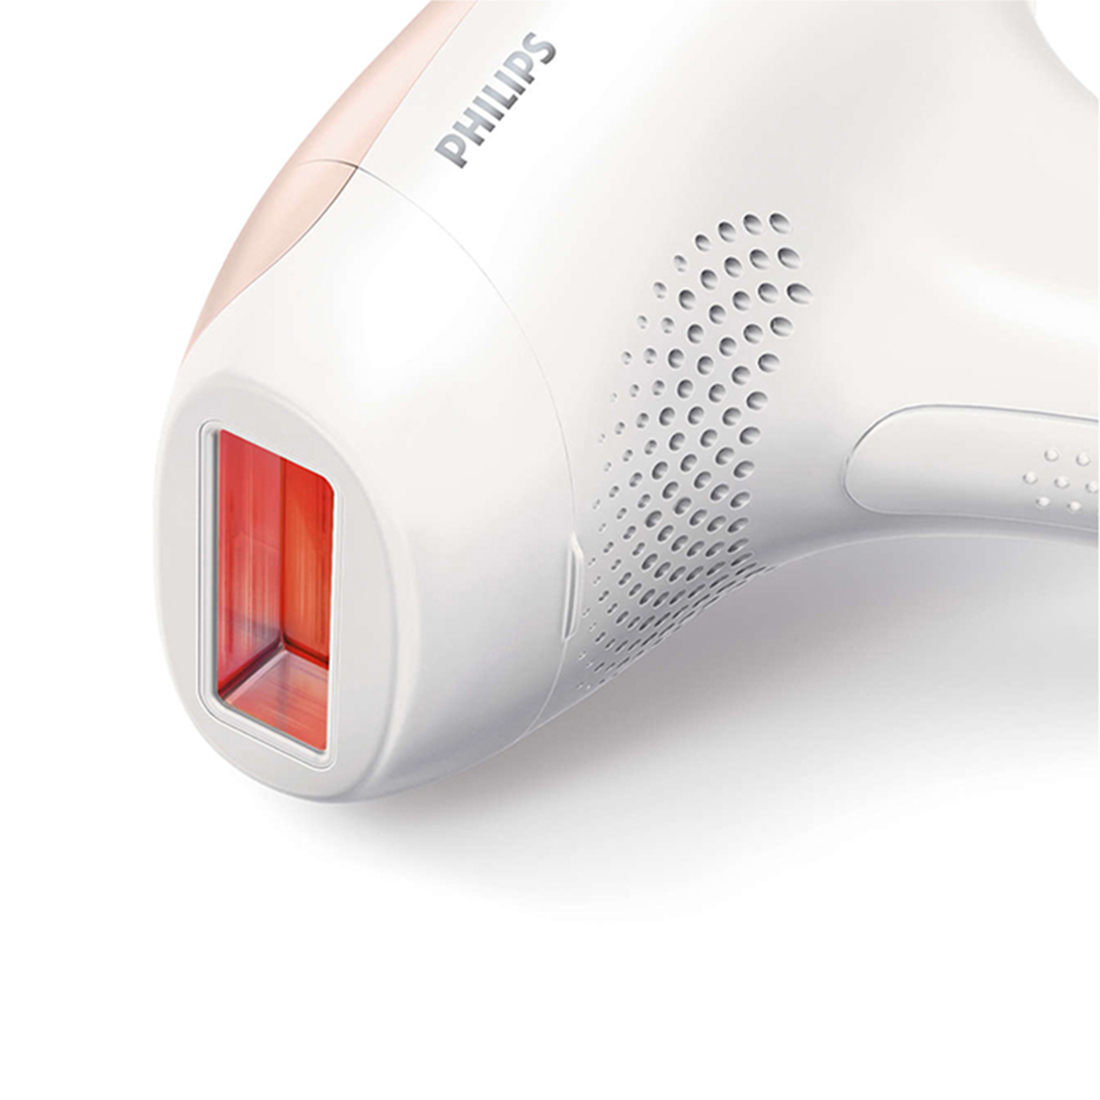 Philips Lumea Advanced SC1999 IPL Hair Removal Price in BD